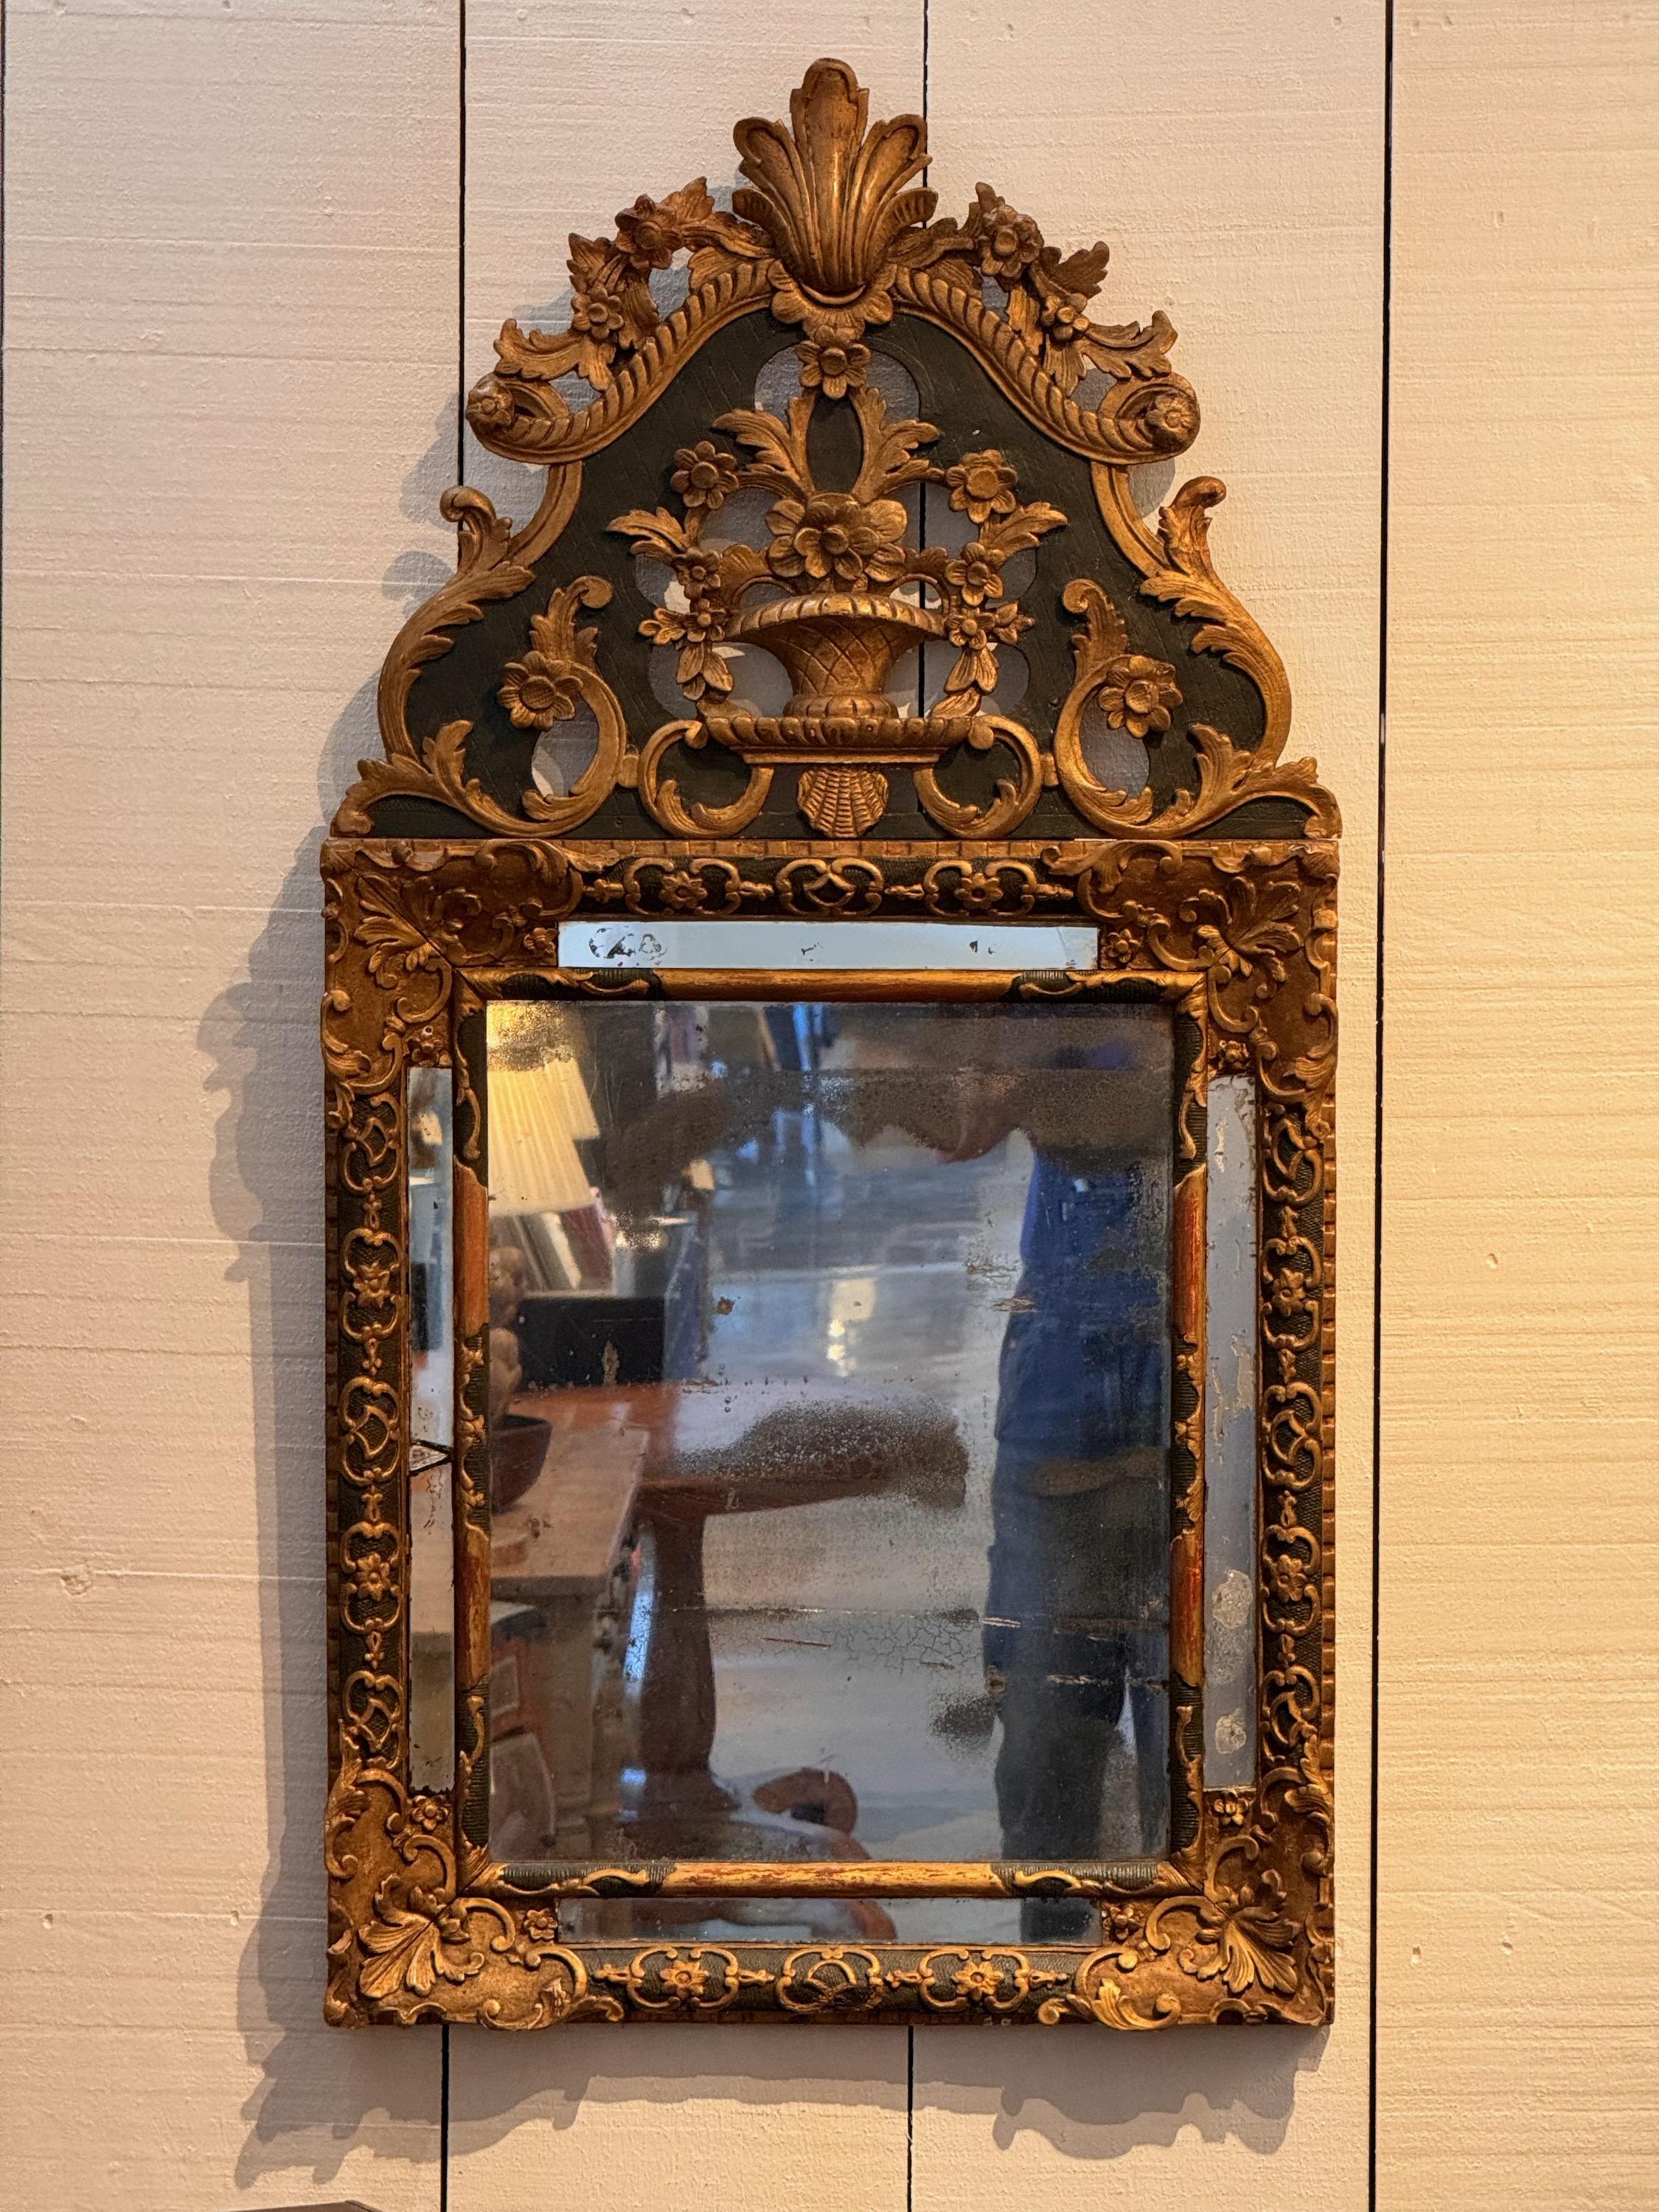 This is a handsome French Mirror with gilt decoration. Instant beauty.